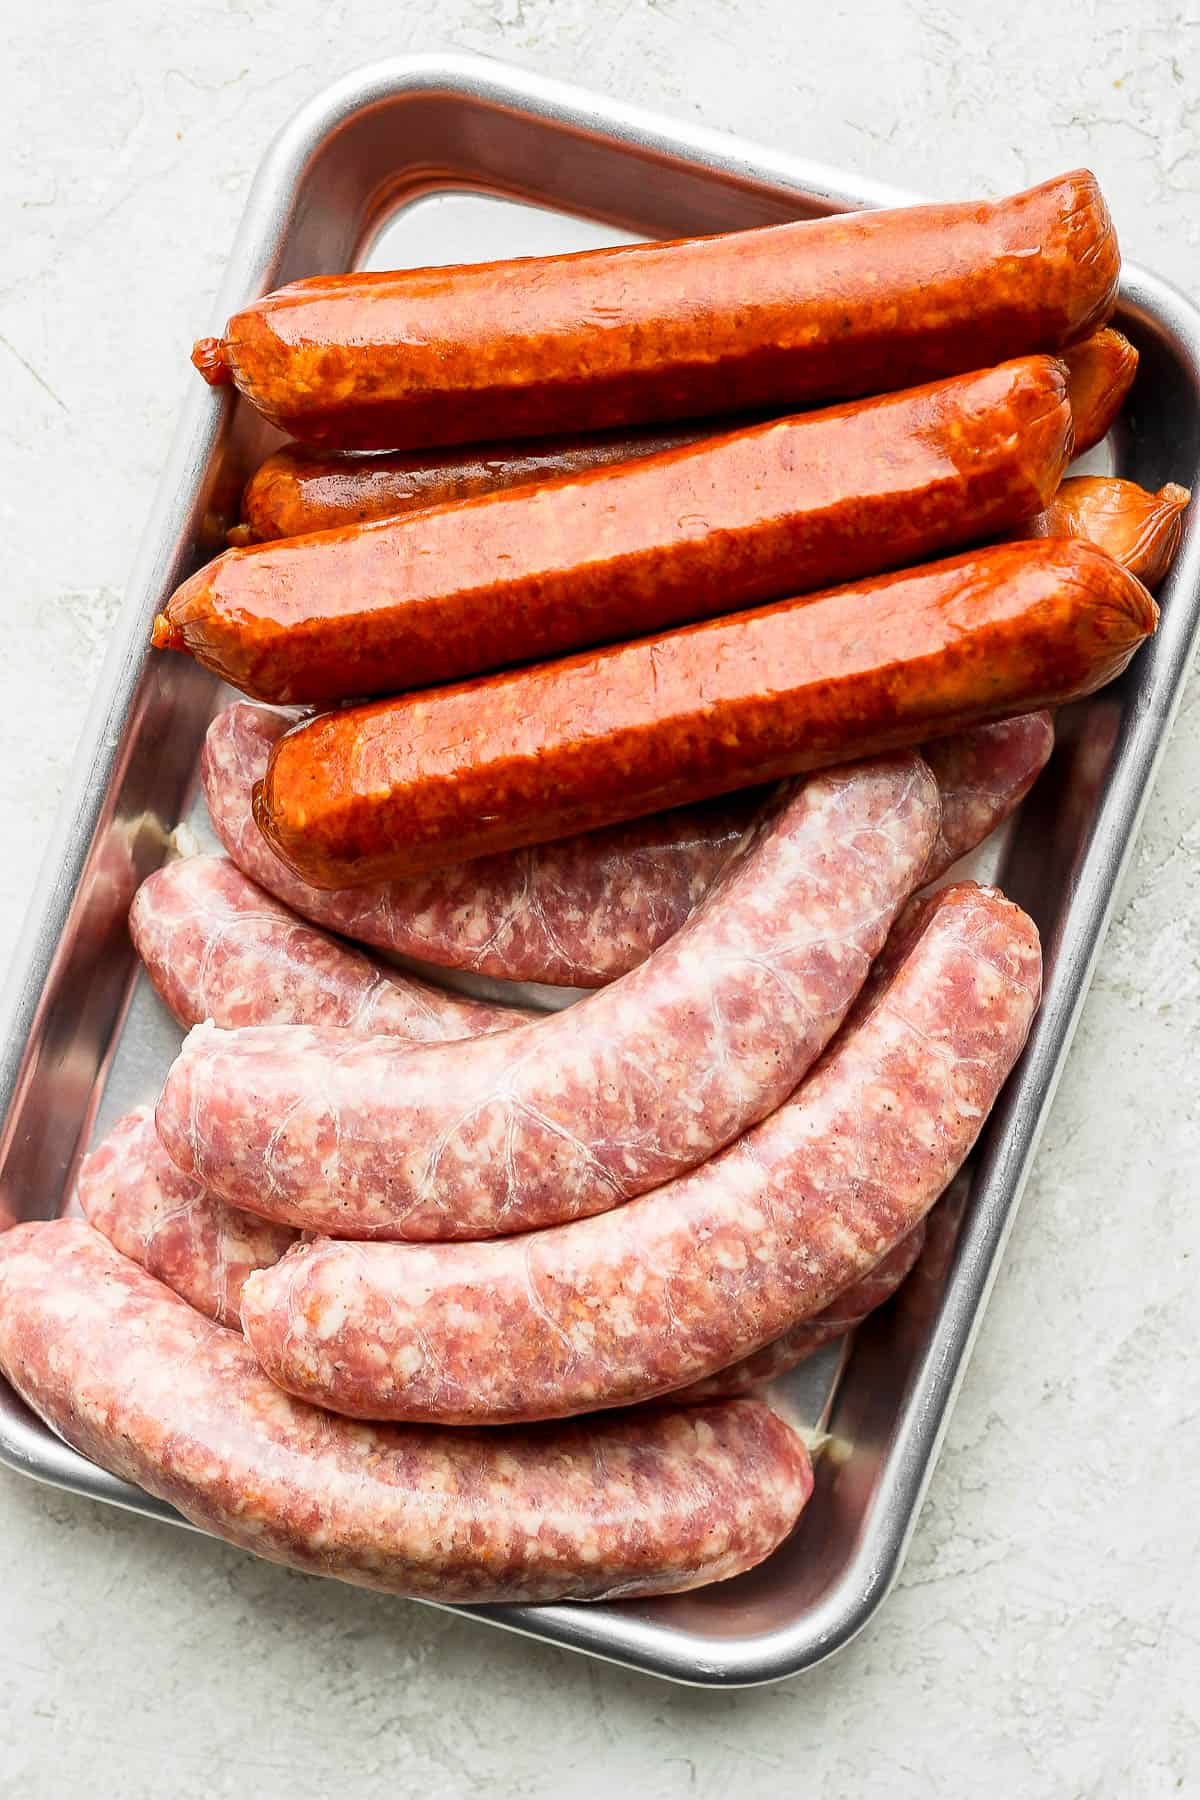 Plate of both raw and pre-cooked brats.